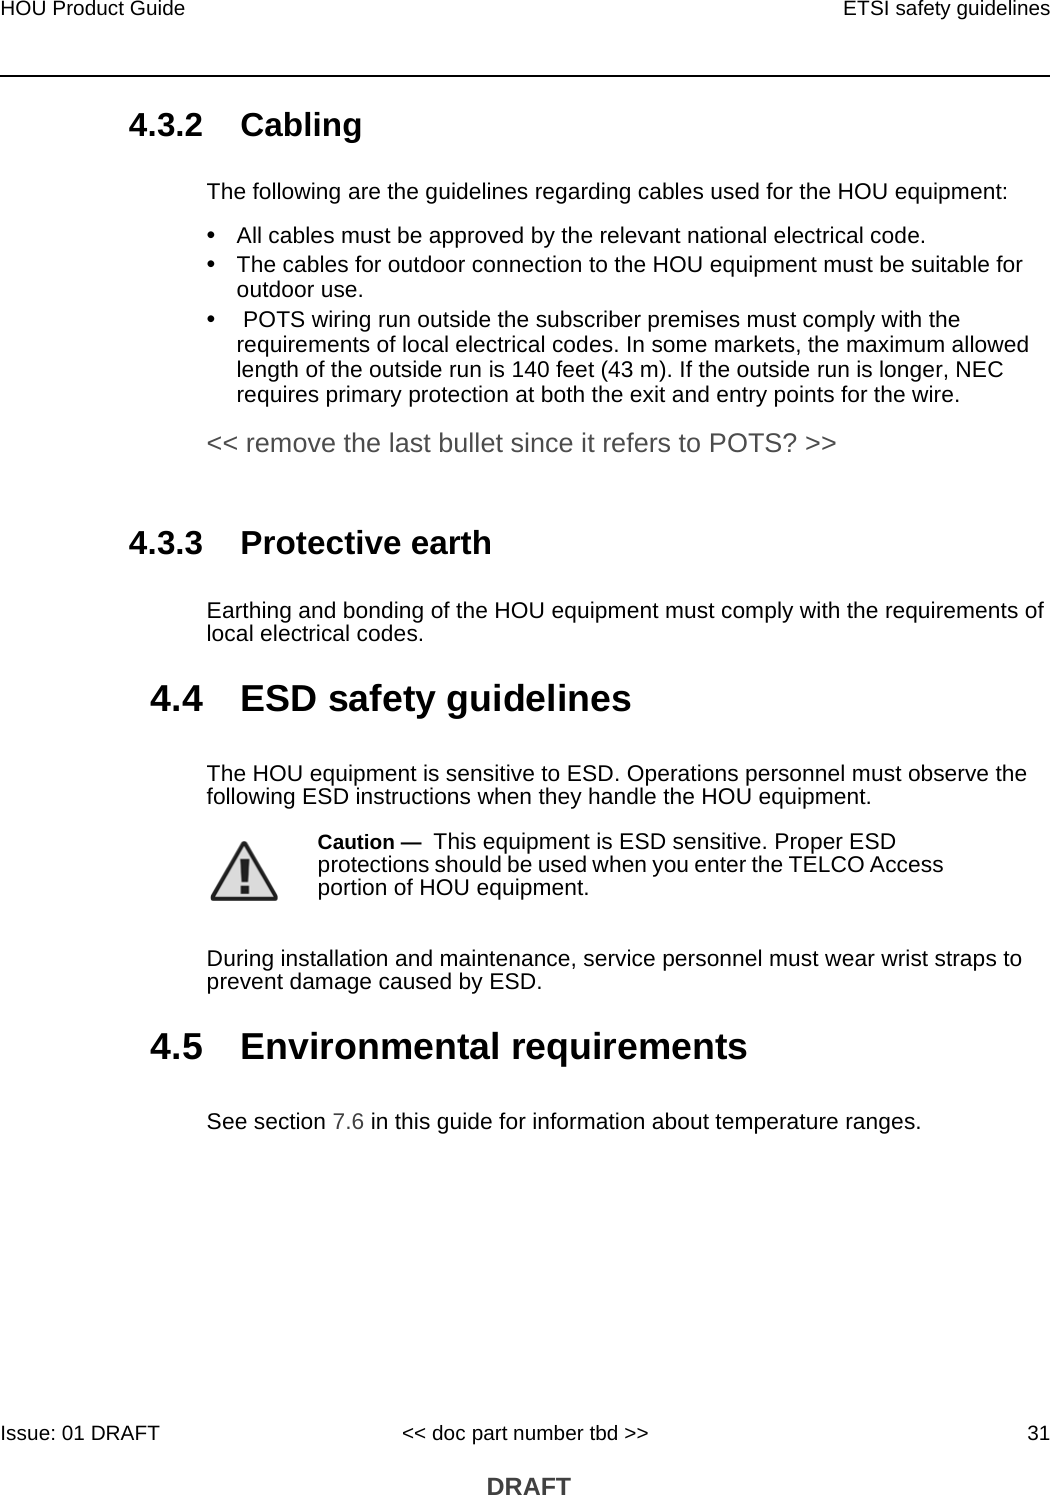 HOU Product Guide ETSI safety guidelinesIssue: 01 DRAFT &lt;&lt; doc part number tbd &gt;&gt; 31 DRAFT4.3.2 CablingThe following are the guidelines regarding cables used for the HOU equipment:•All cables must be approved by the relevant national electrical code.•The cables for outdoor connection to the HOU equipment must be suitable for outdoor use.• POTS wiring run outside the subscriber premises must comply with the requirements of local electrical codes. In some markets, the maximum allowed length of the outside run is 140 feet (43 m). If the outside run is longer, NEC requires primary protection at both the exit and entry points for the wire. &lt;&lt; remove the last bullet since it refers to POTS? &gt;&gt;4.3.3 Protective earthEarthing and bonding of the HOU equipment must comply with the requirements of local electrical codes.4.4 ESD safety guidelinesThe HOU equipment is sensitive to ESD. Operations personnel must observe the following ESD instructions when they handle the HOU equipment. During installation and maintenance, service personnel must wear wrist straps to prevent damage caused by ESD.4.5 Environmental requirementsSee section 7.6 in this guide for information about temperature ranges.Caution —  This equipment is ESD sensitive. Proper ESD protections should be used when you enter the TELCO Access portion of HOU equipment.